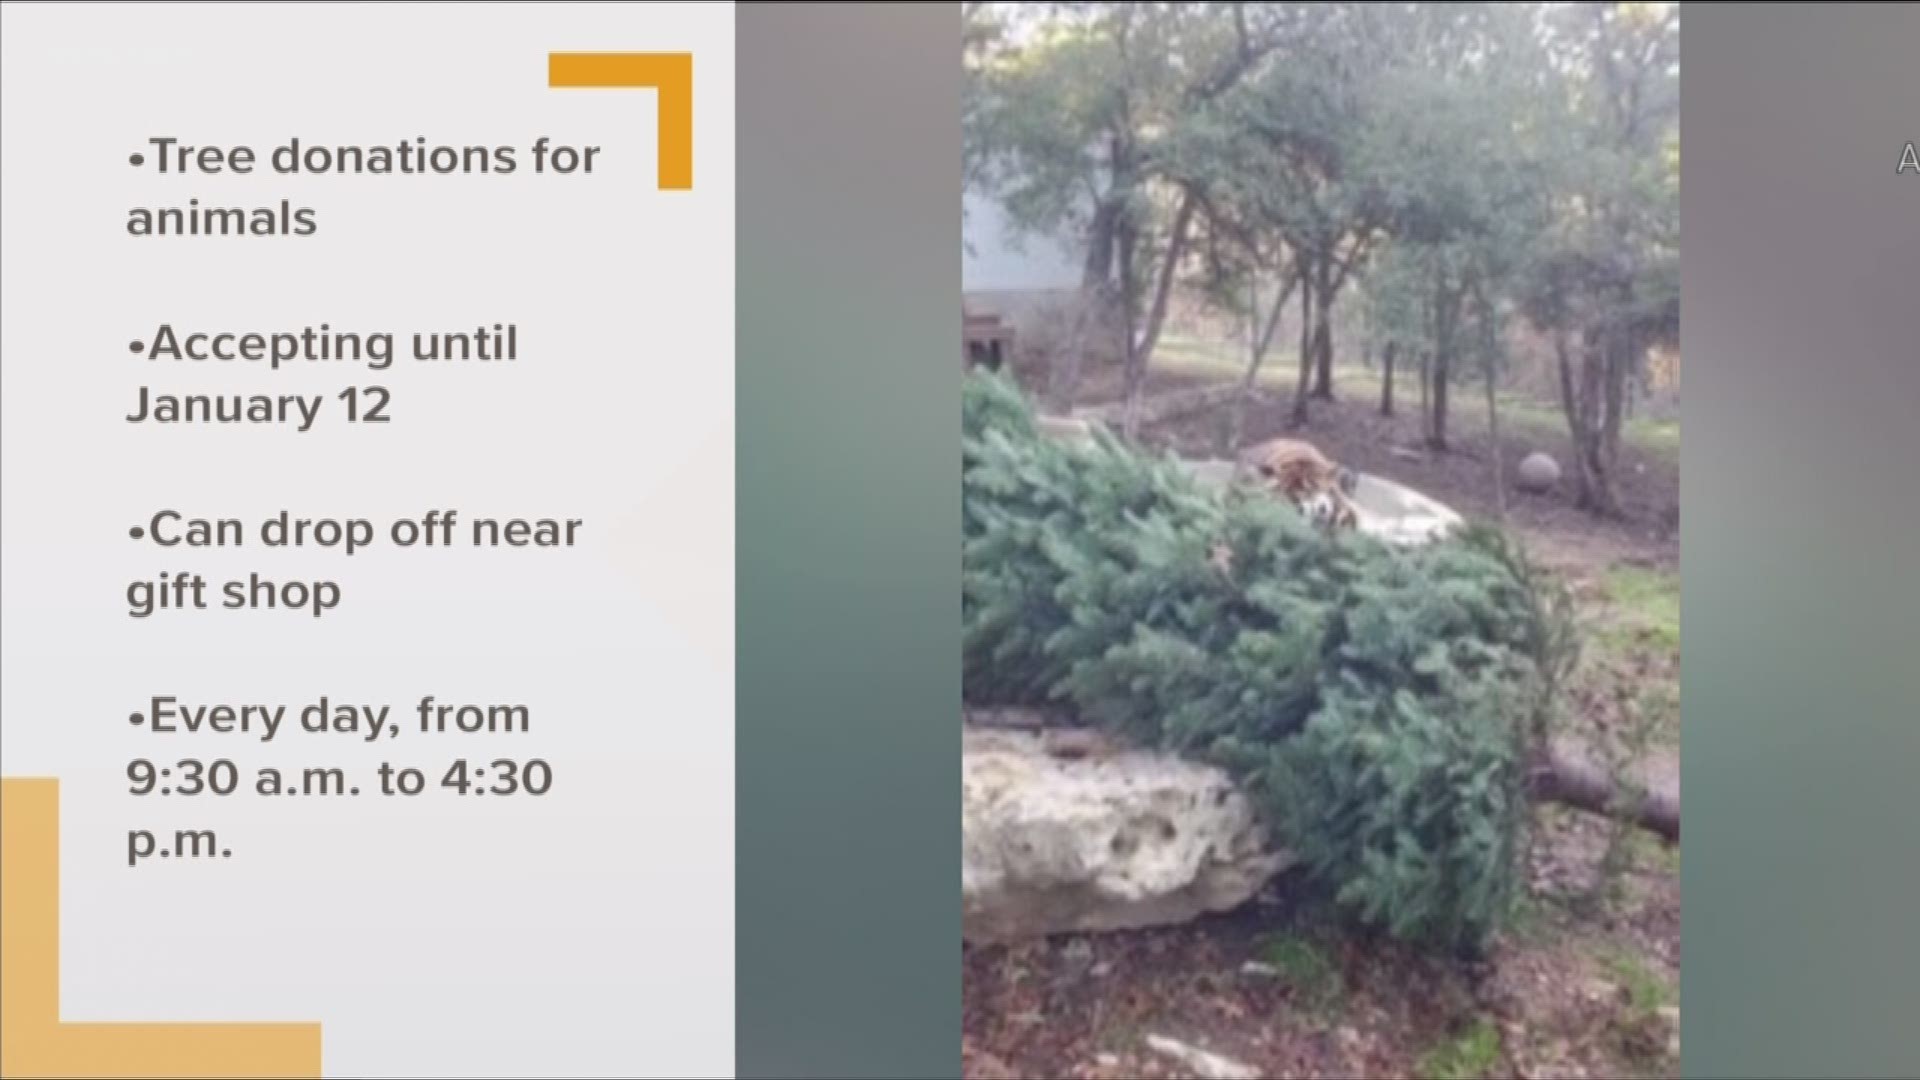 The zoo said it will accept real tree donations for its animals to play with.